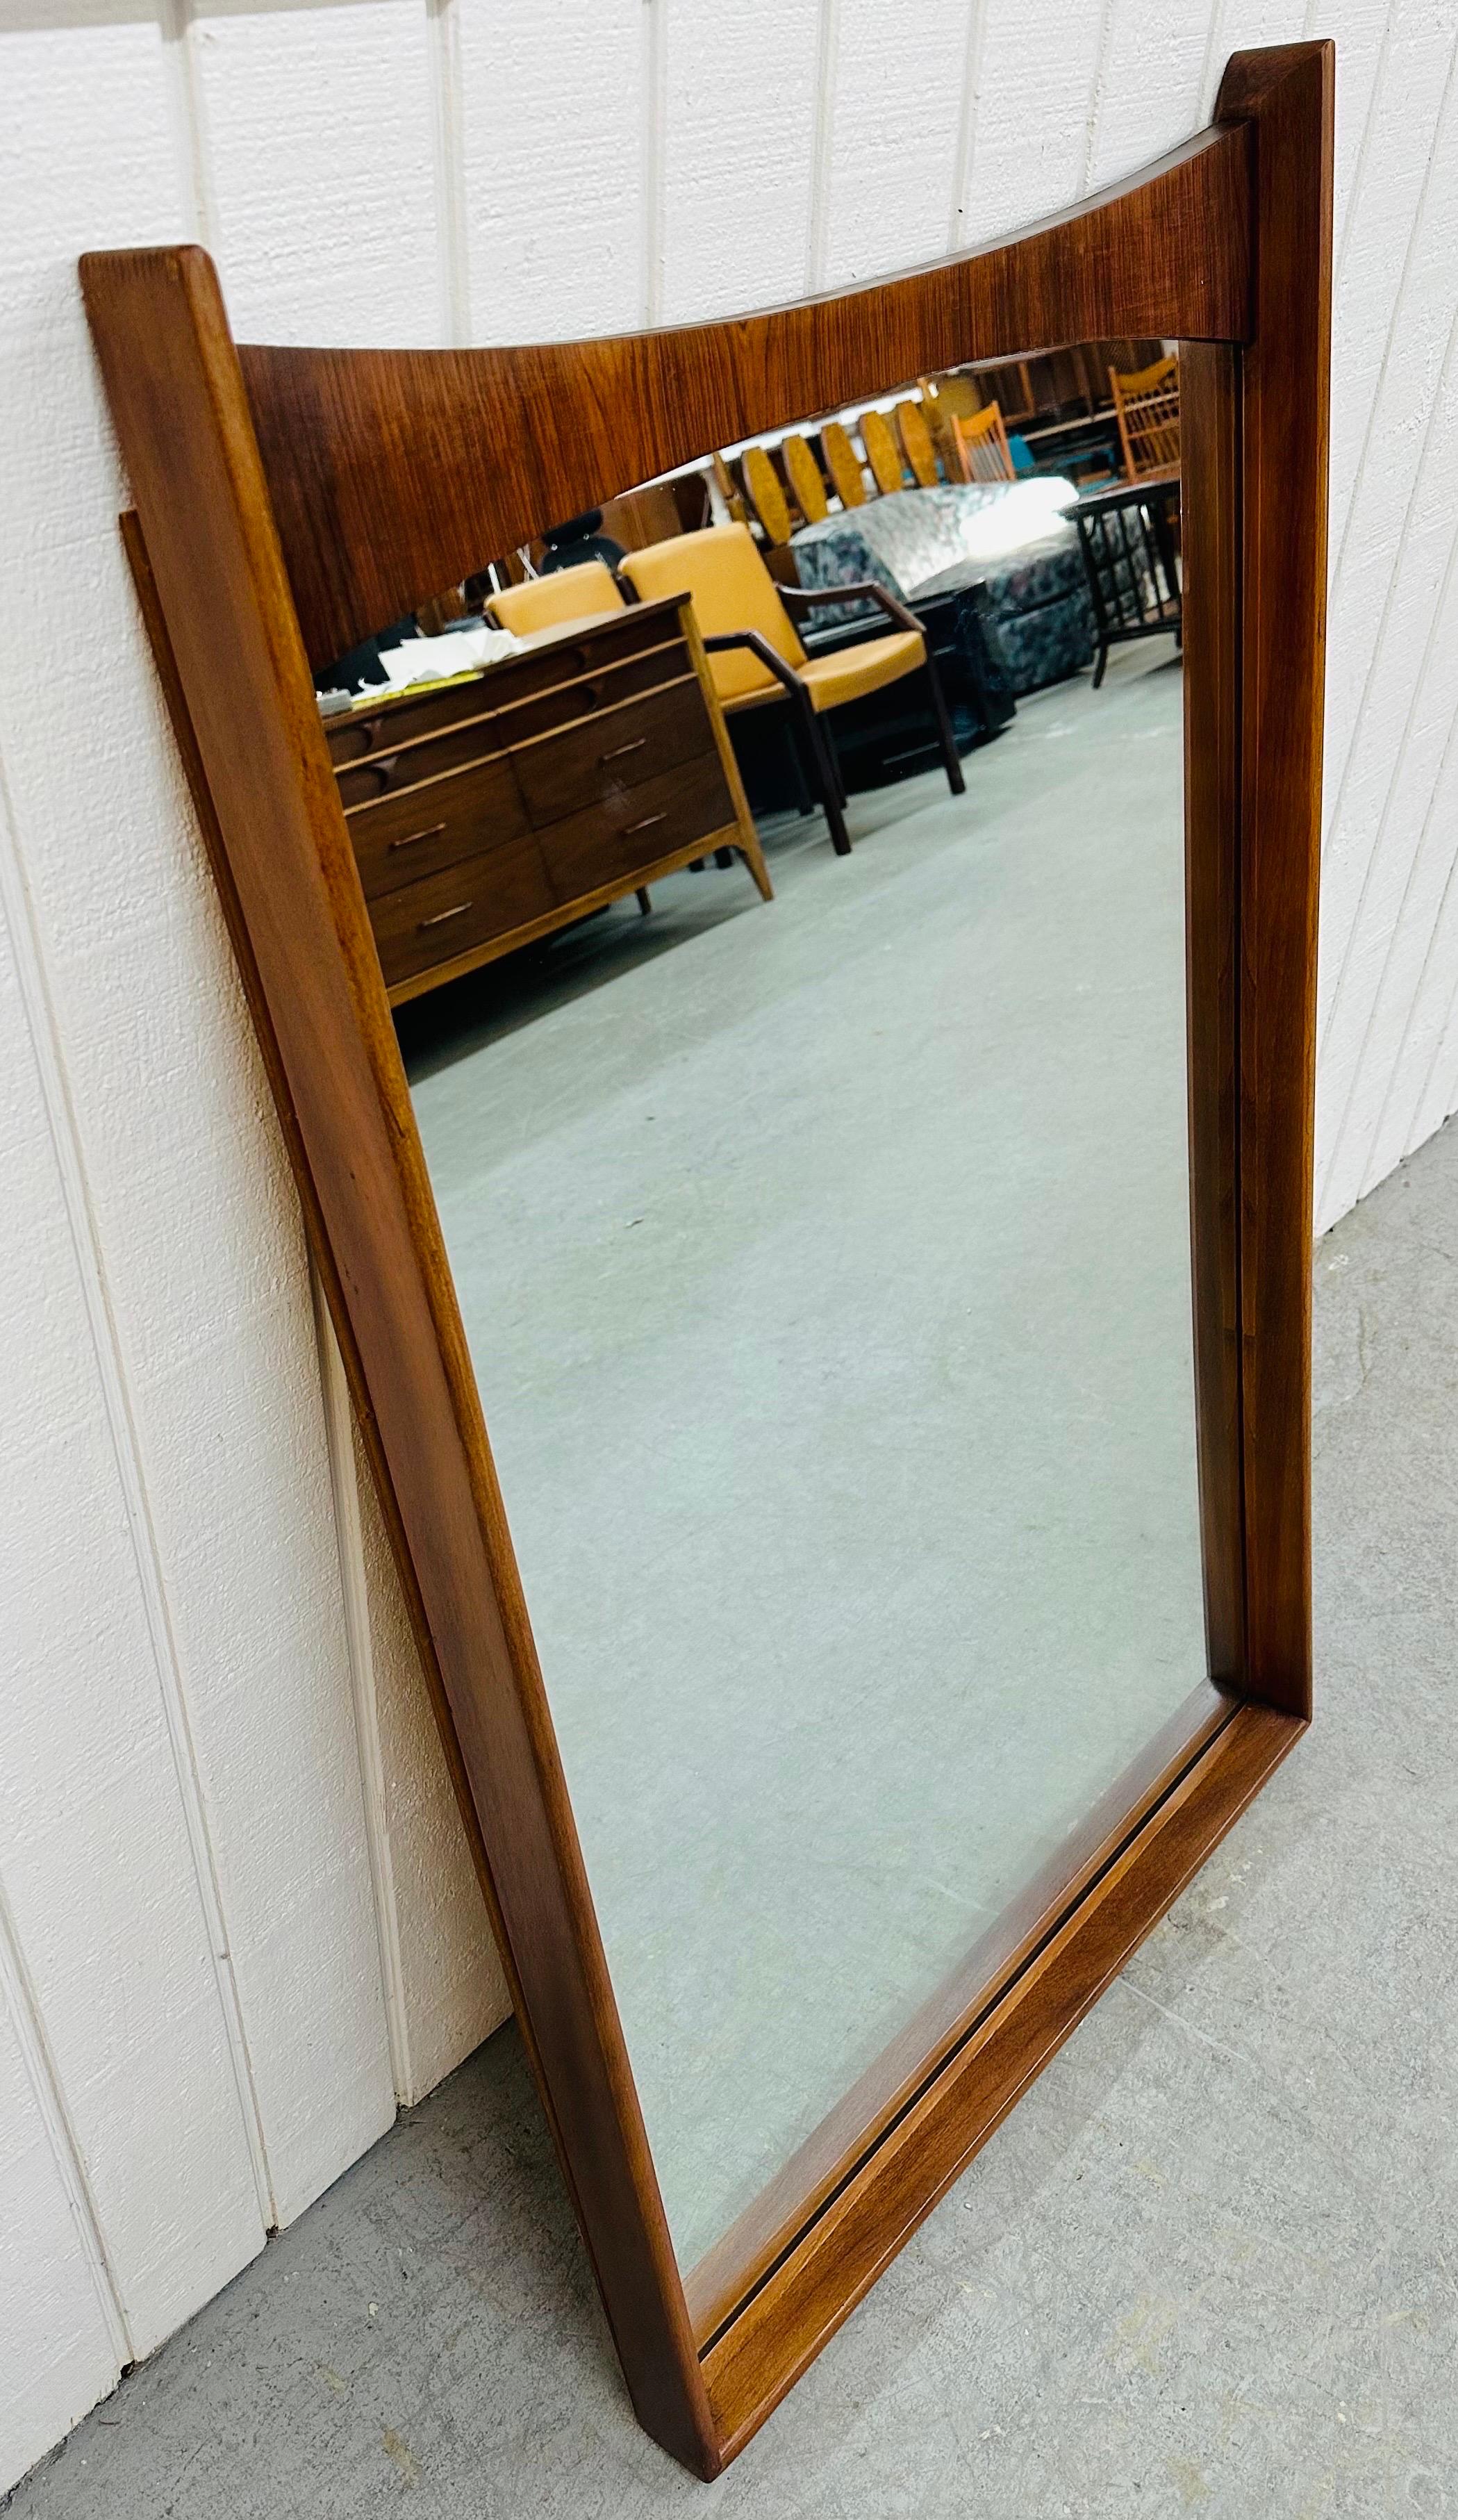 This listing is for a Mid-Century Modern Kent Coffey Perspecta Wall Mirror. Featuring a straight line rectangular design with curved top, solid wood frame, beveled mirror, and rosewood accent at the top. This is an exceptional combination of quality